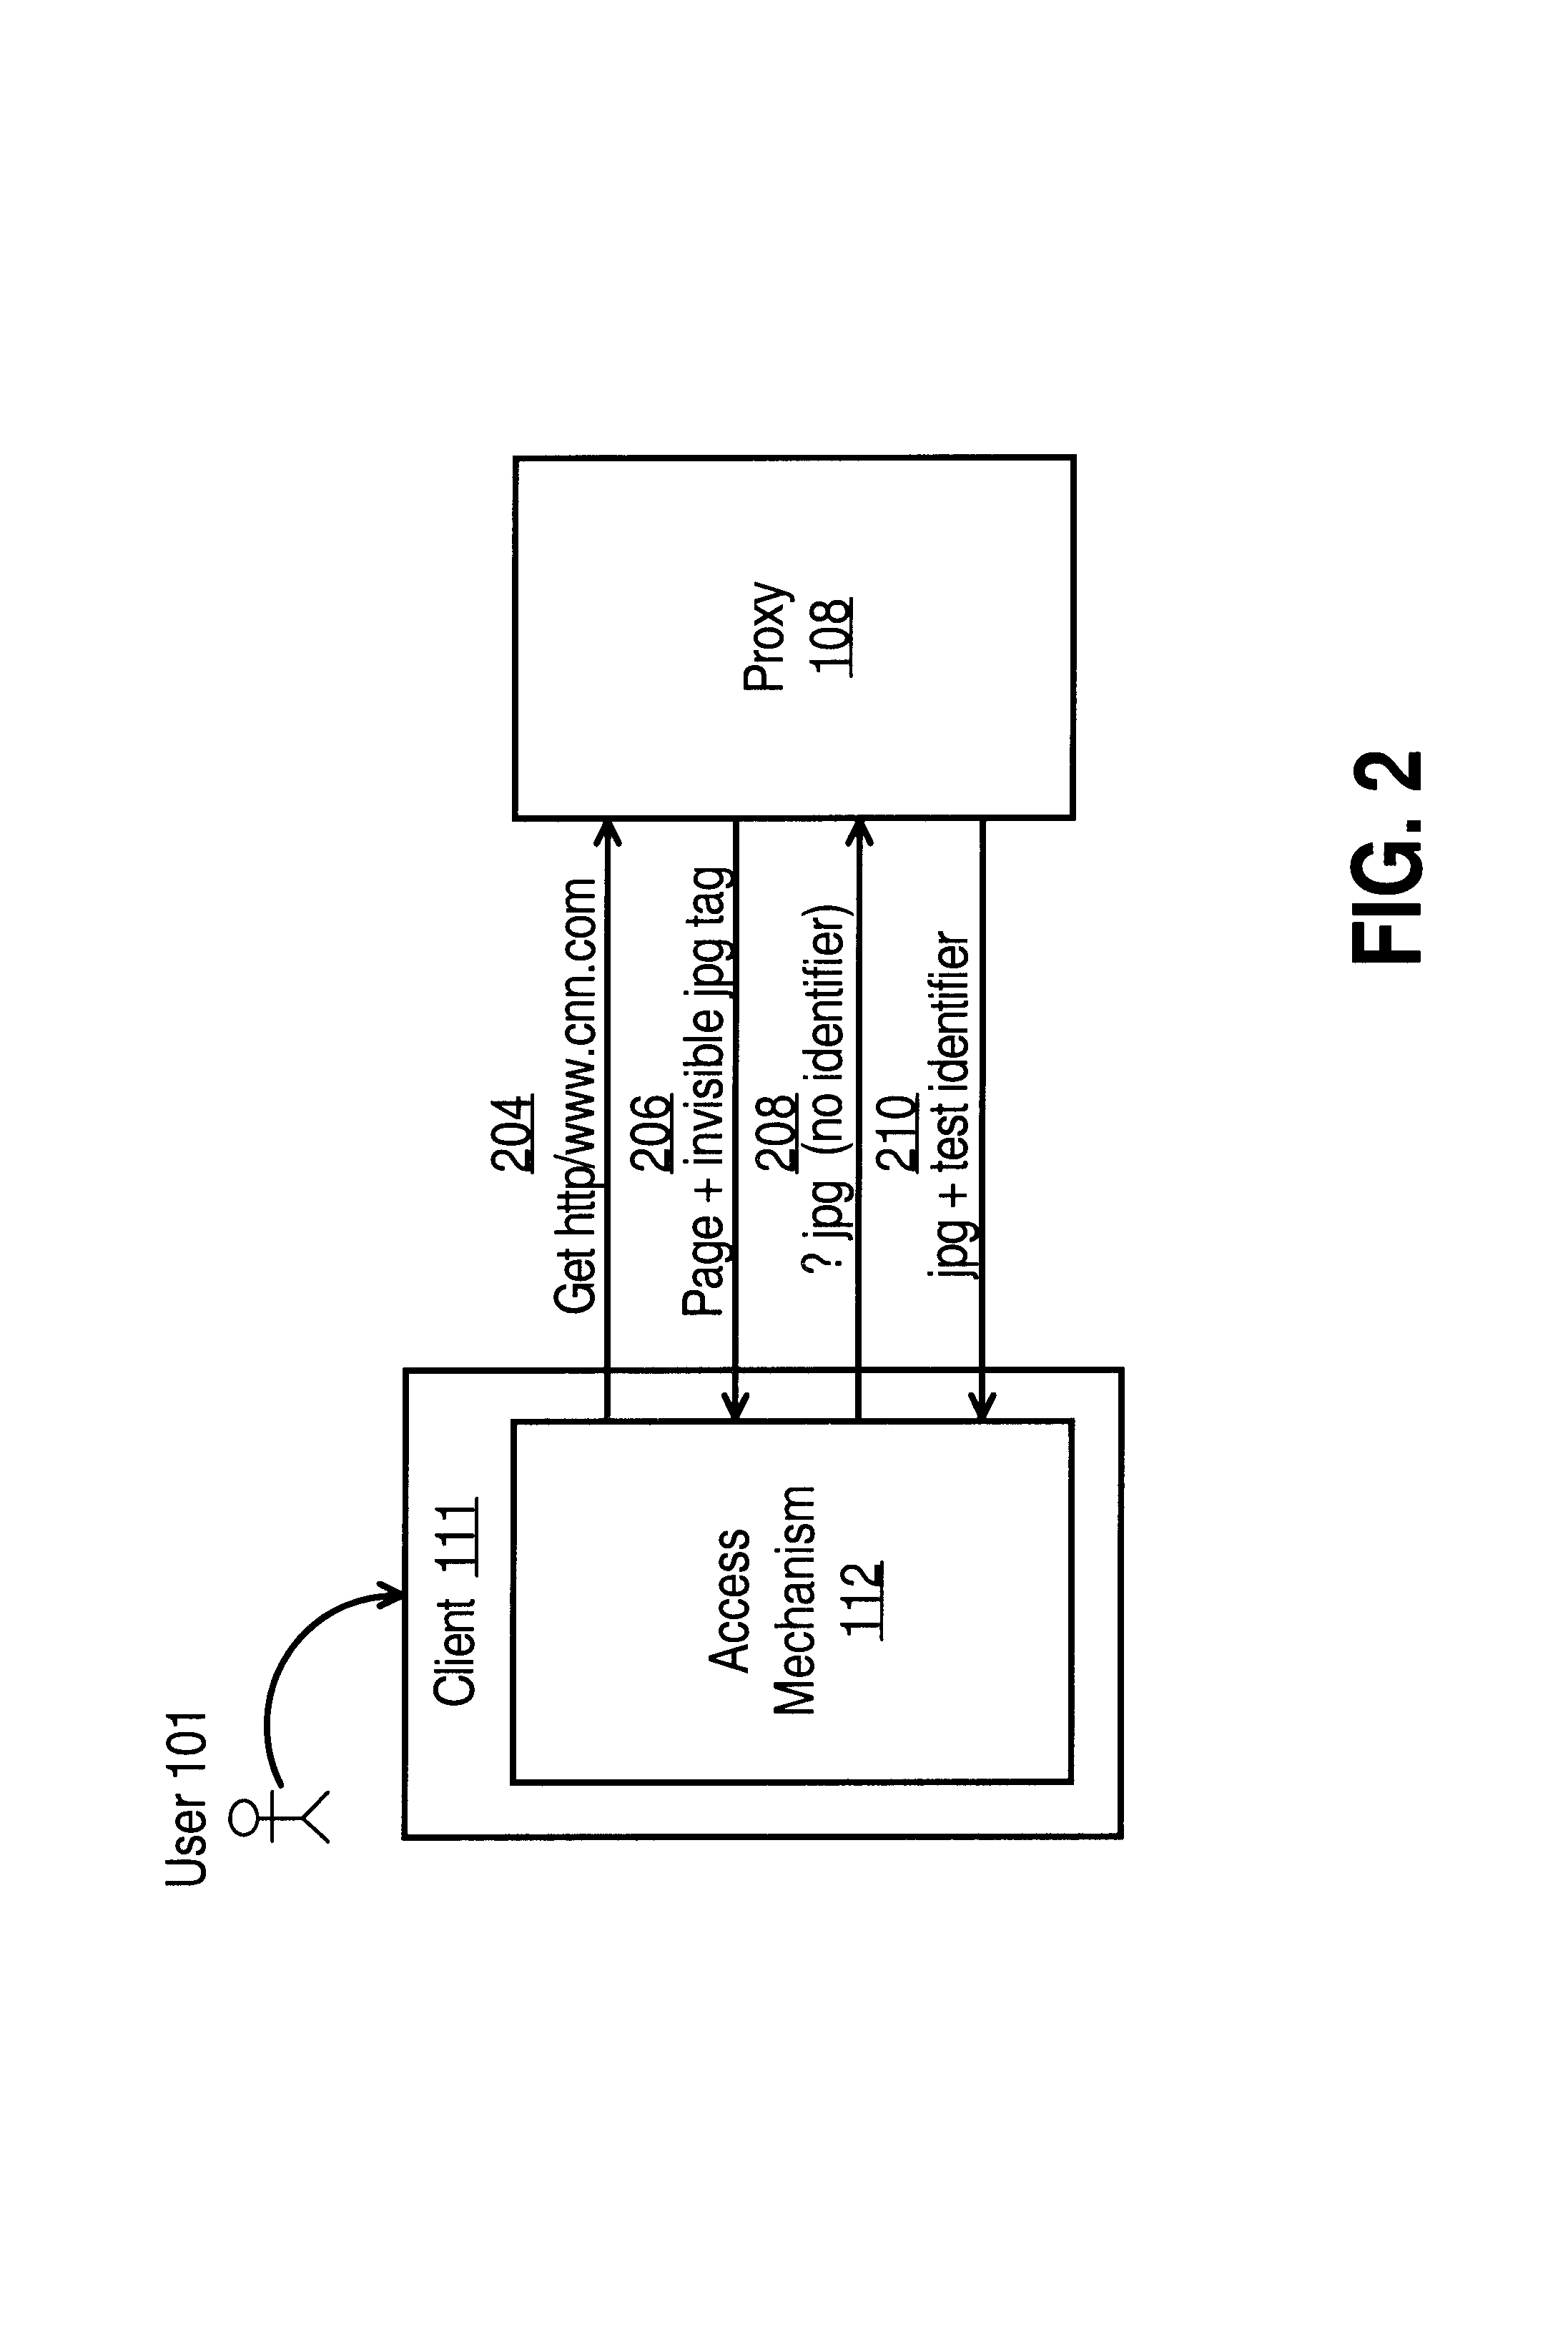 Method of creating data streams for user-specific usage data gathering systems